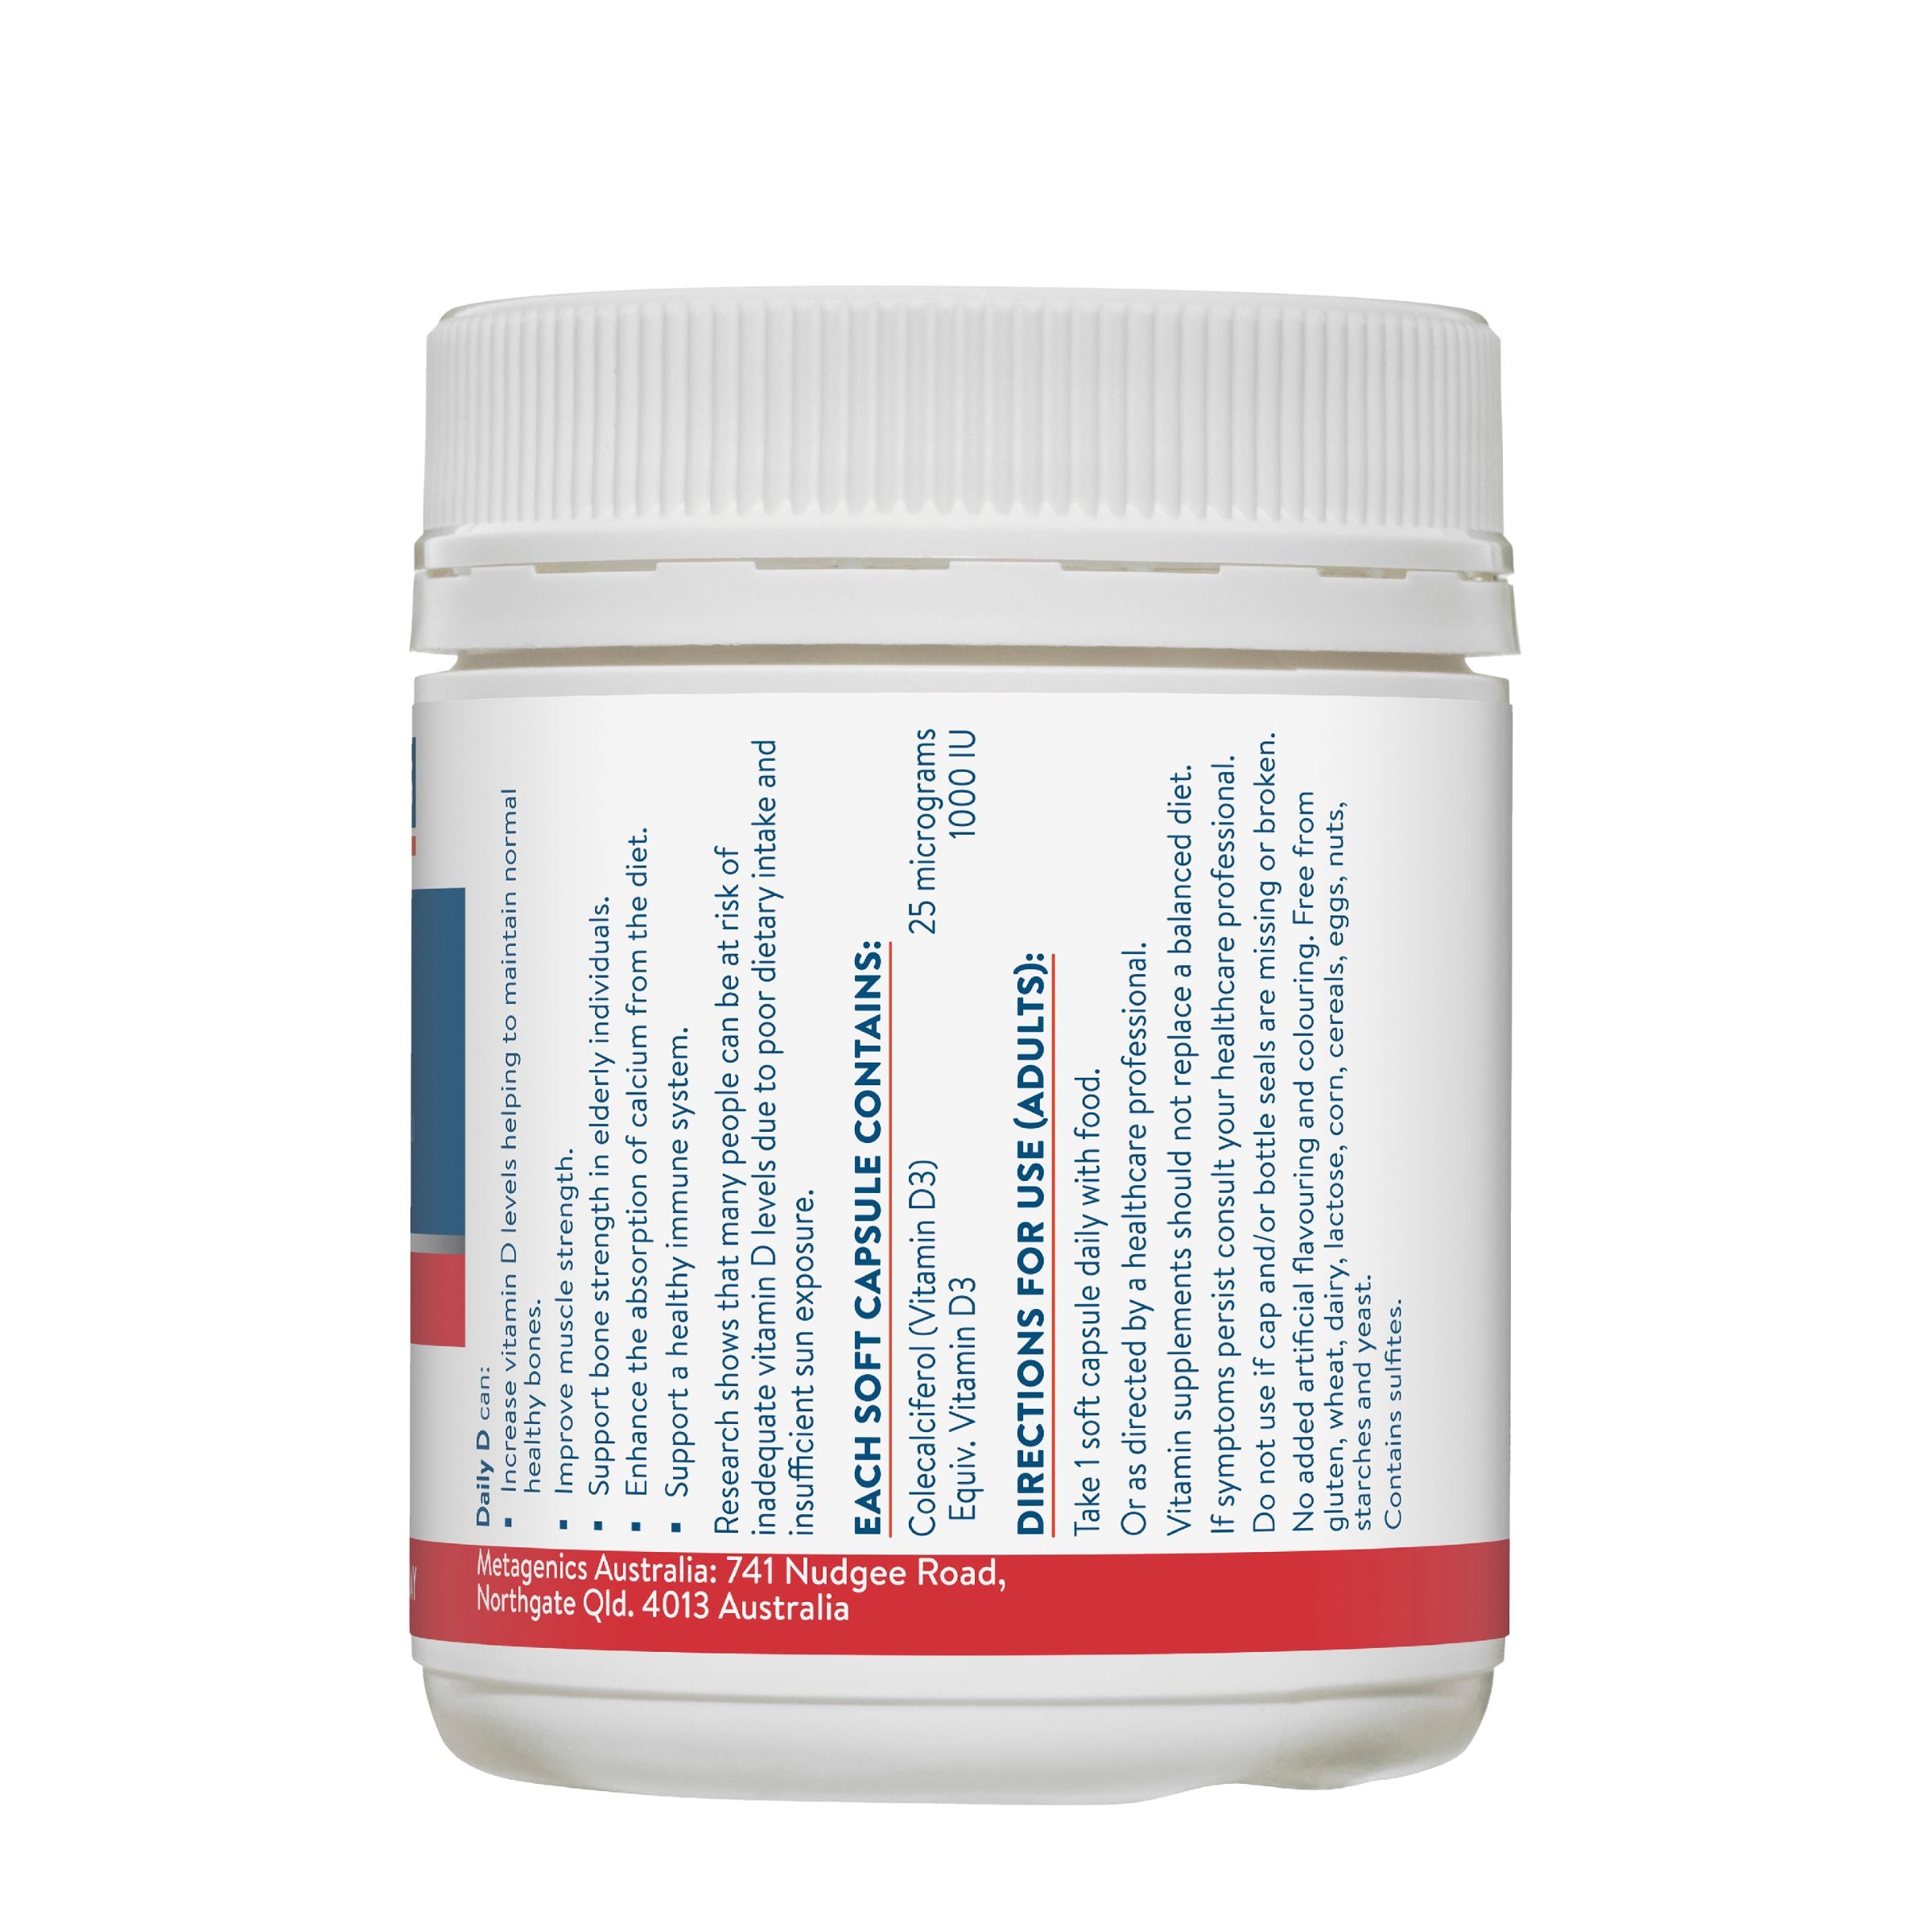 Ethical Nutrients Daily D 270 Soft Capsules #size_270 soft capsules